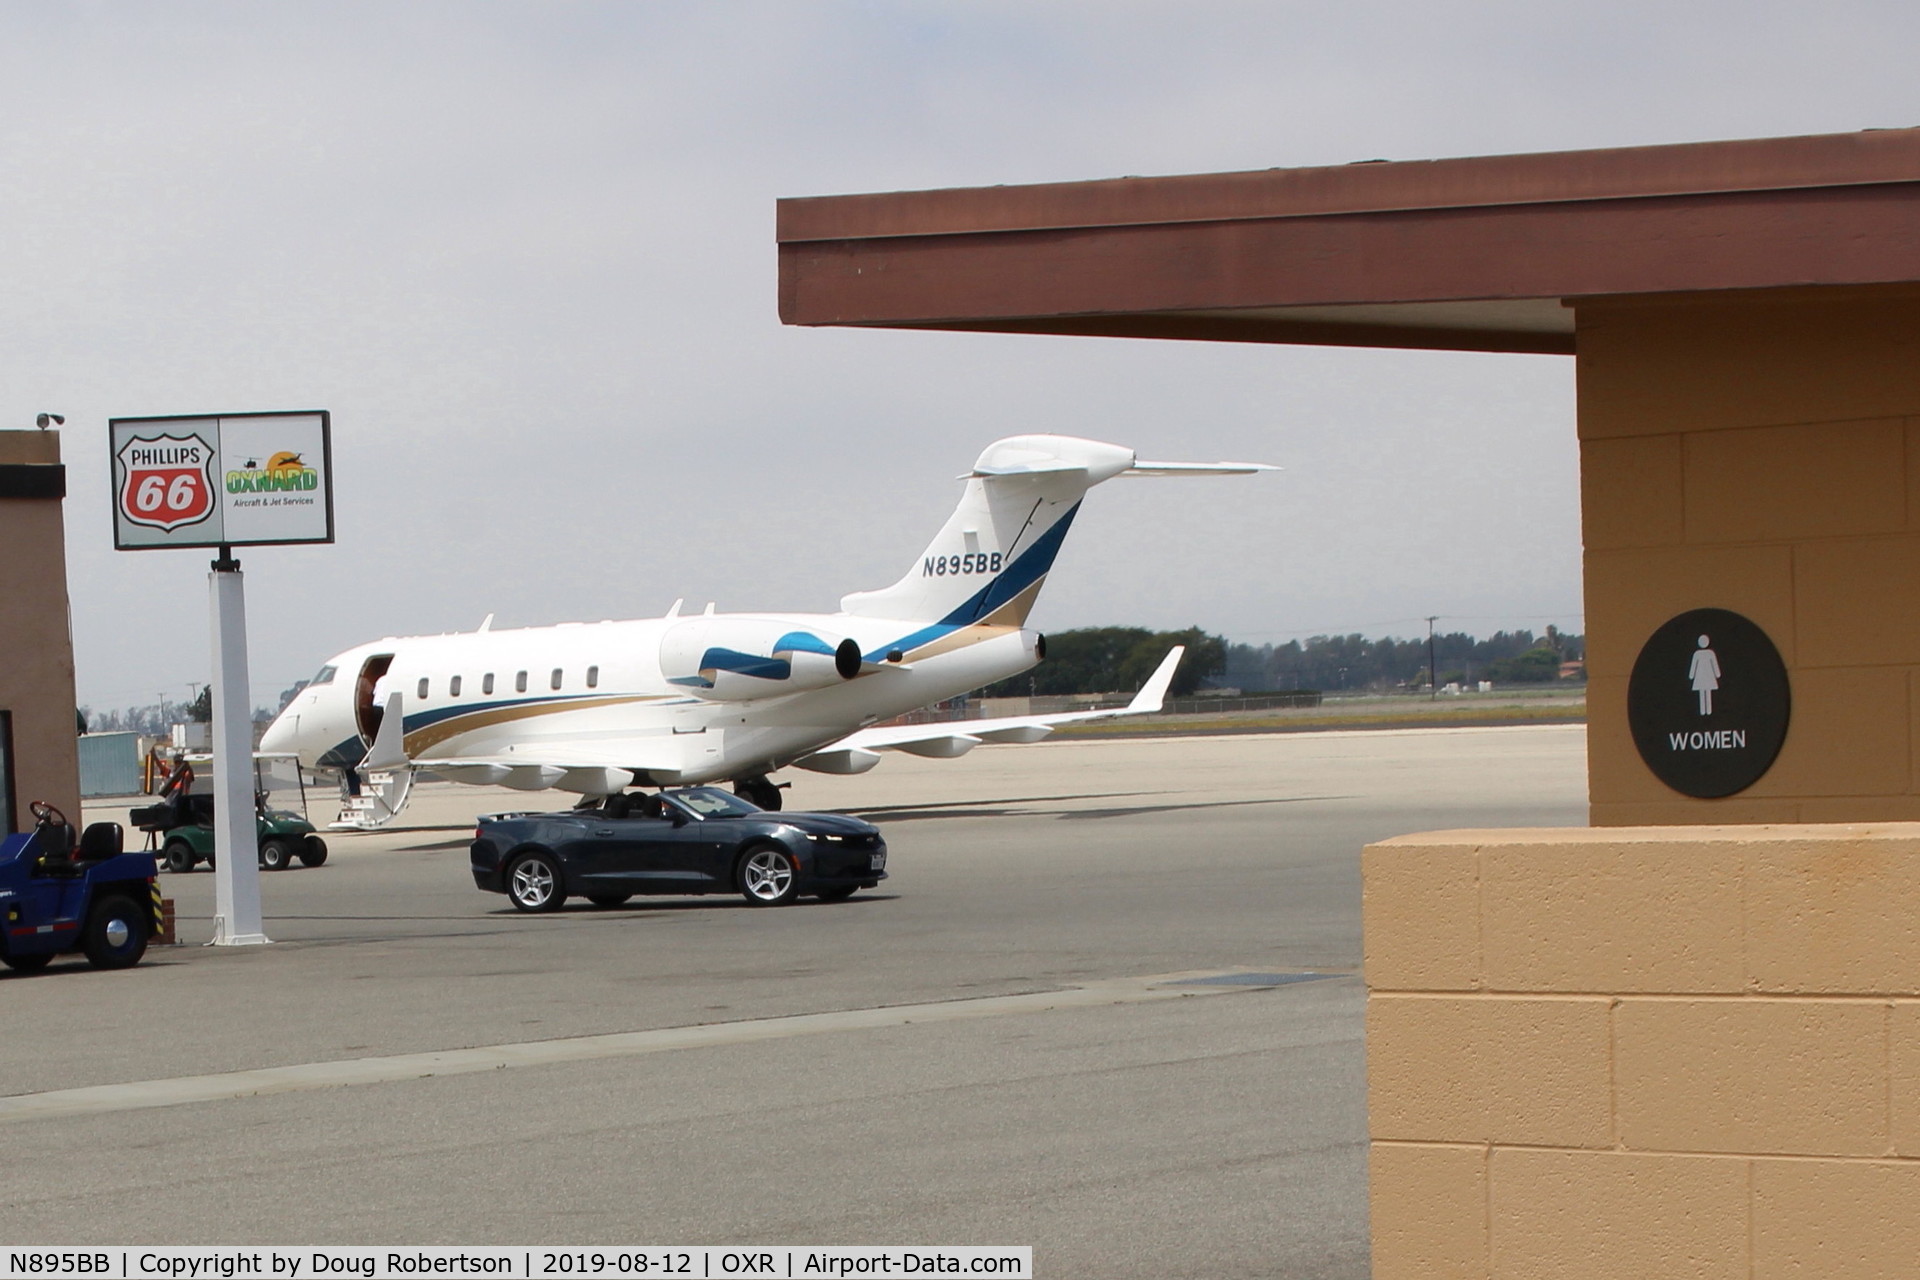 N895BB, 2007 Bombardier Challenger 300 (BD-100-1A10) C/N 20156, 2007 Bombardier CHALLENGER 300, 2 Honeywell AS907-1-1A (engineering designation) Turbofans with FADEC, 8,050 lb each thermodynamic rating. Flat rated 6,500 lb st each.